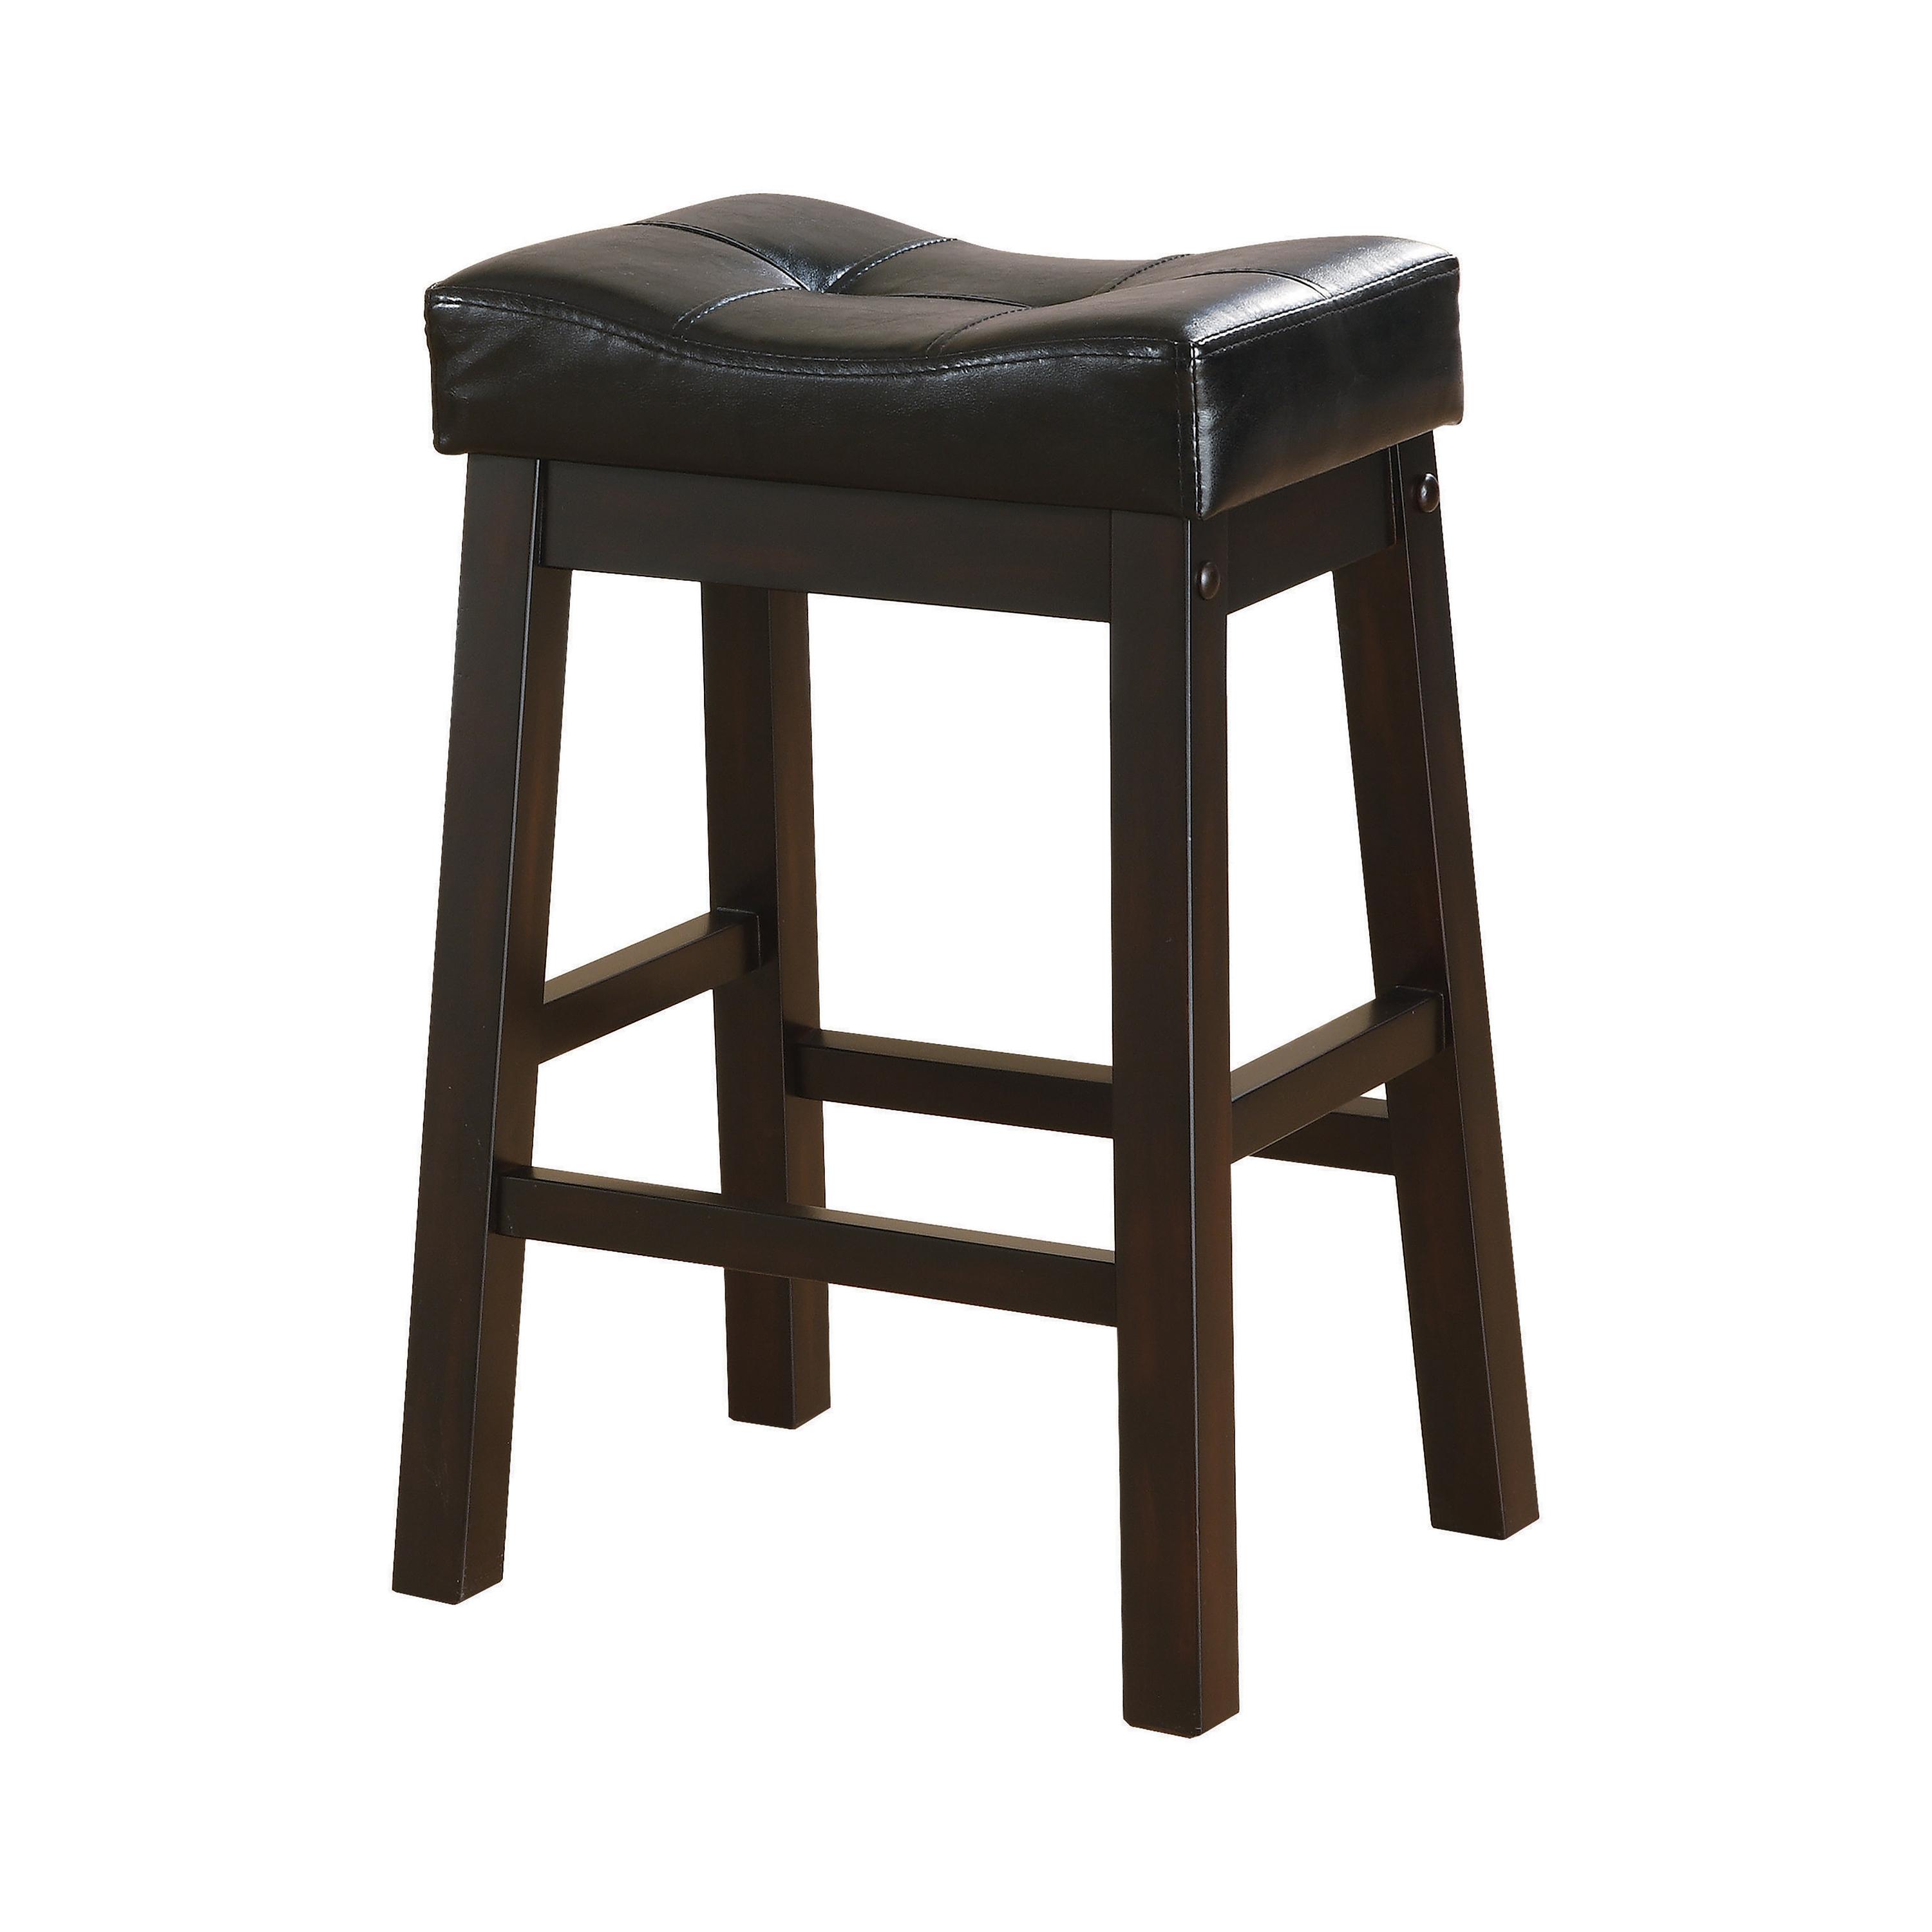 Contemporary Counter Height Stool Set 120519 120519 in Black Leatherette